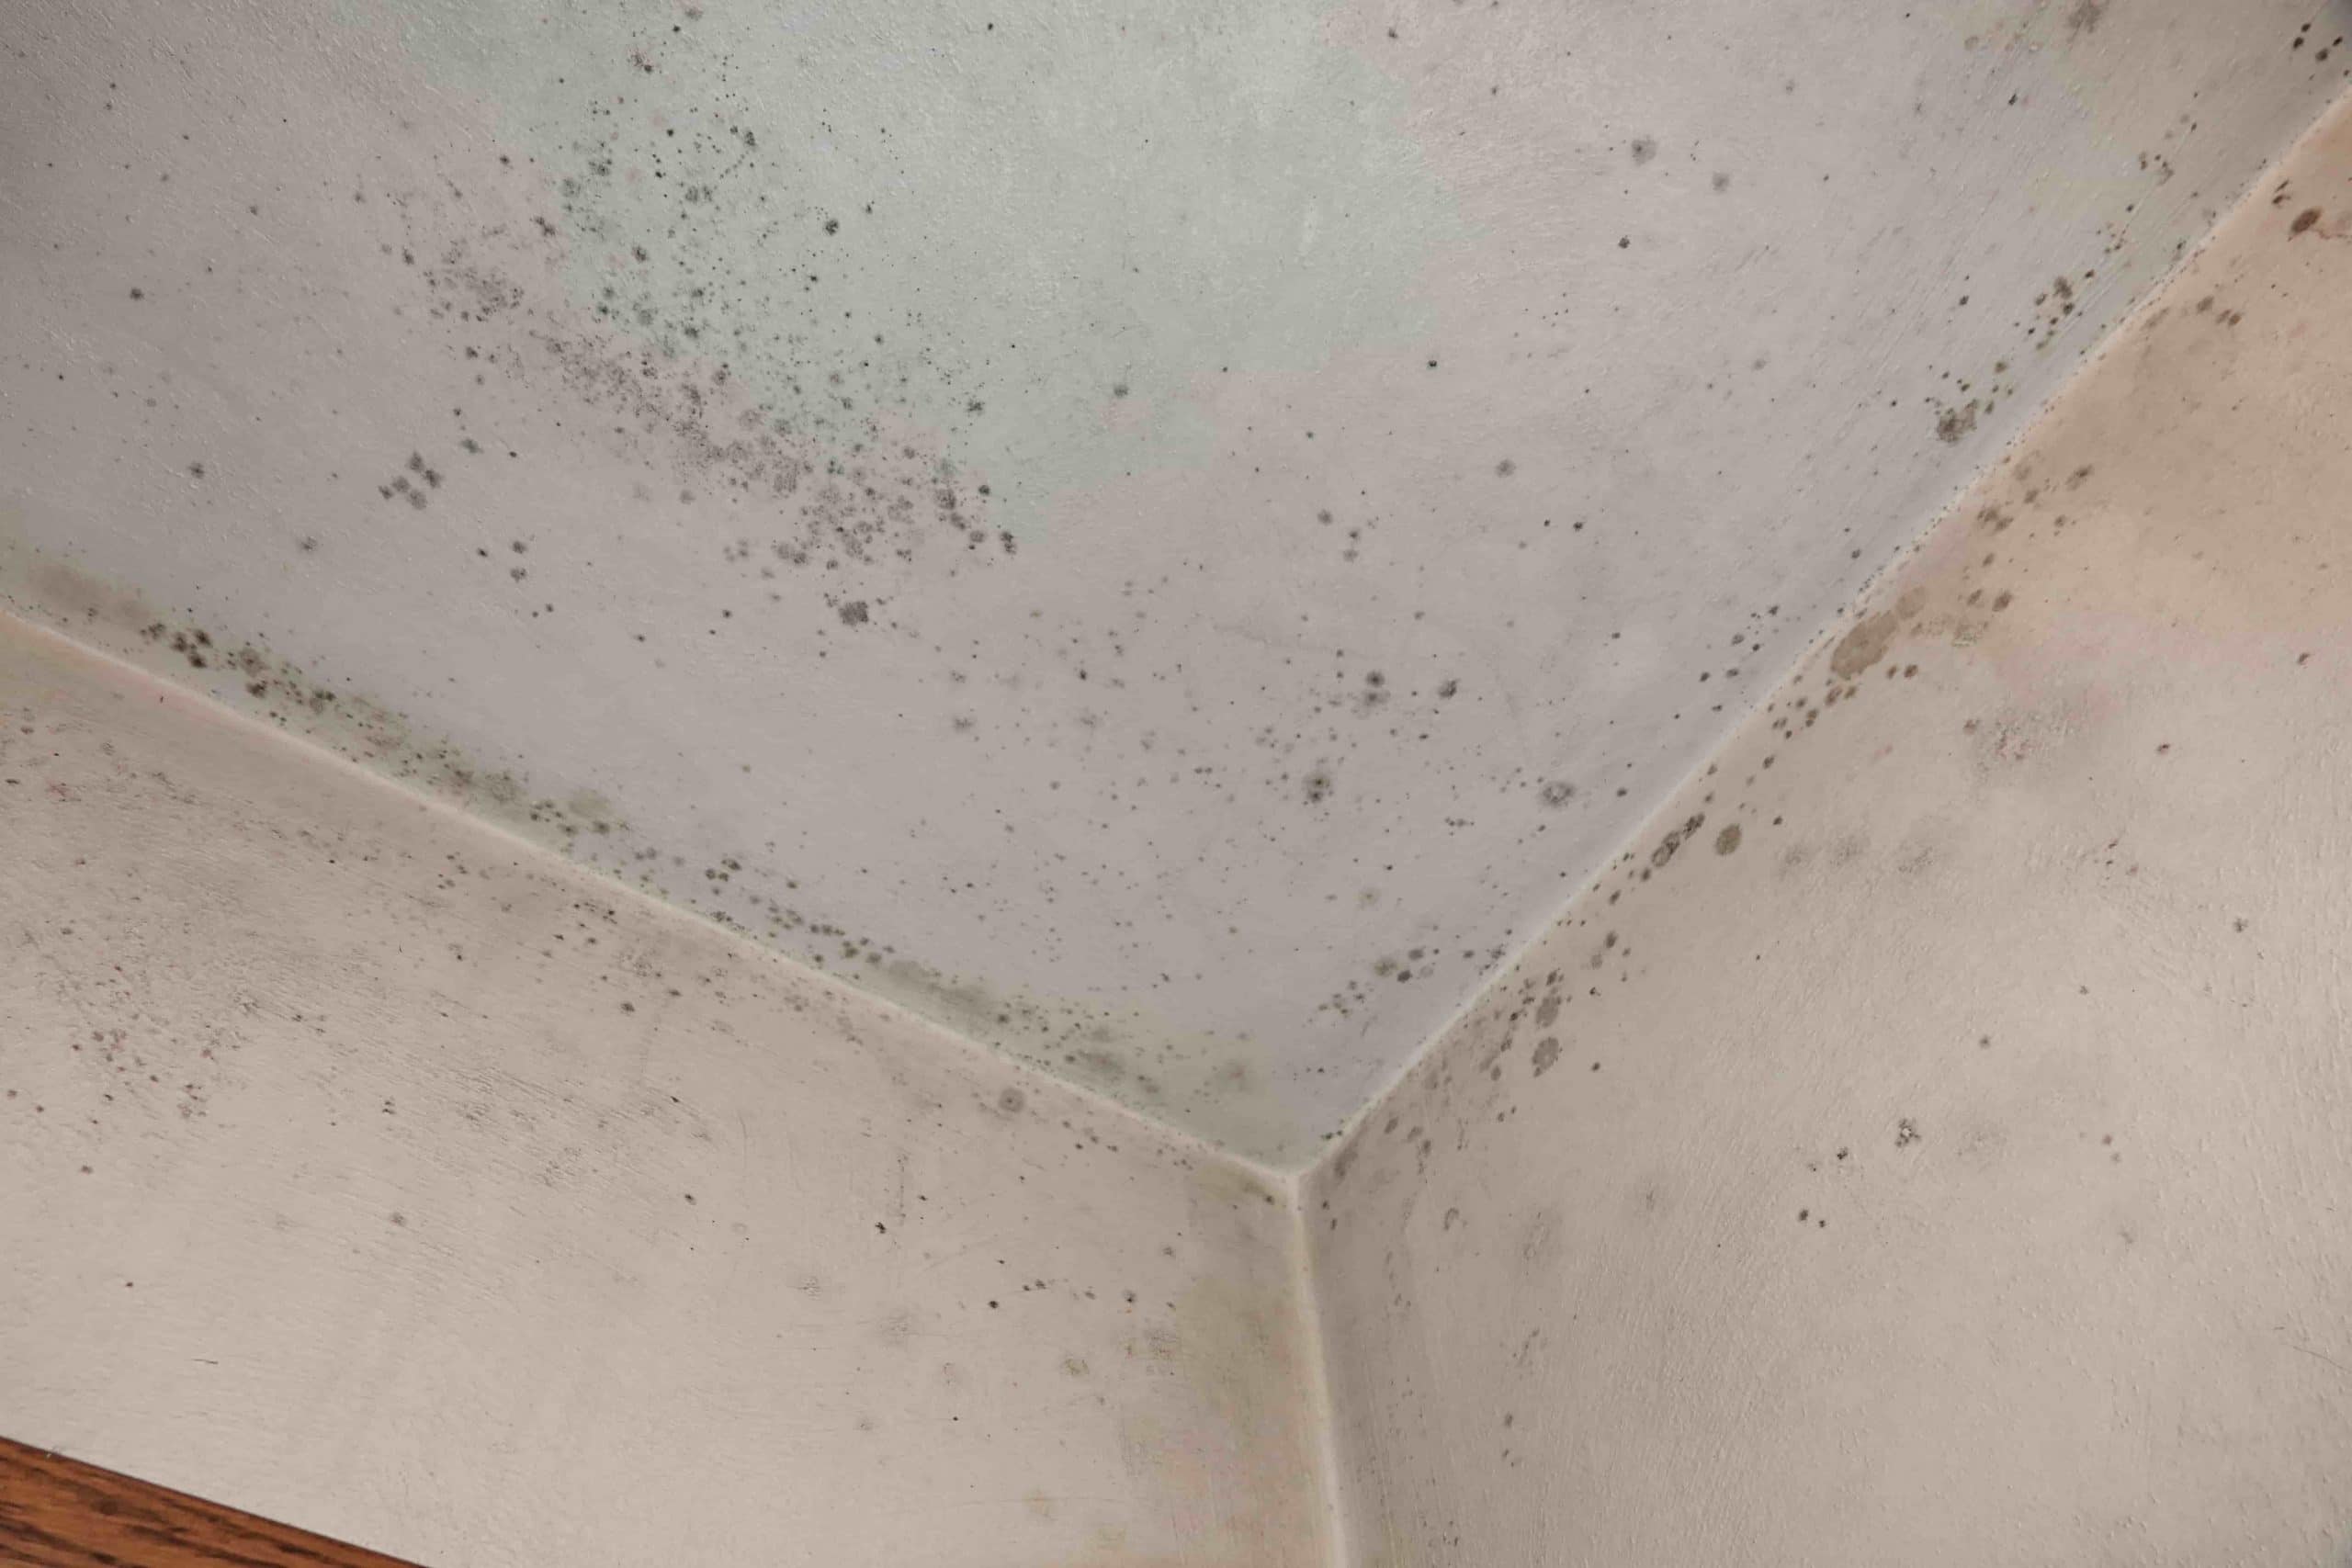 3 Ways House Mold Can Make You Sick